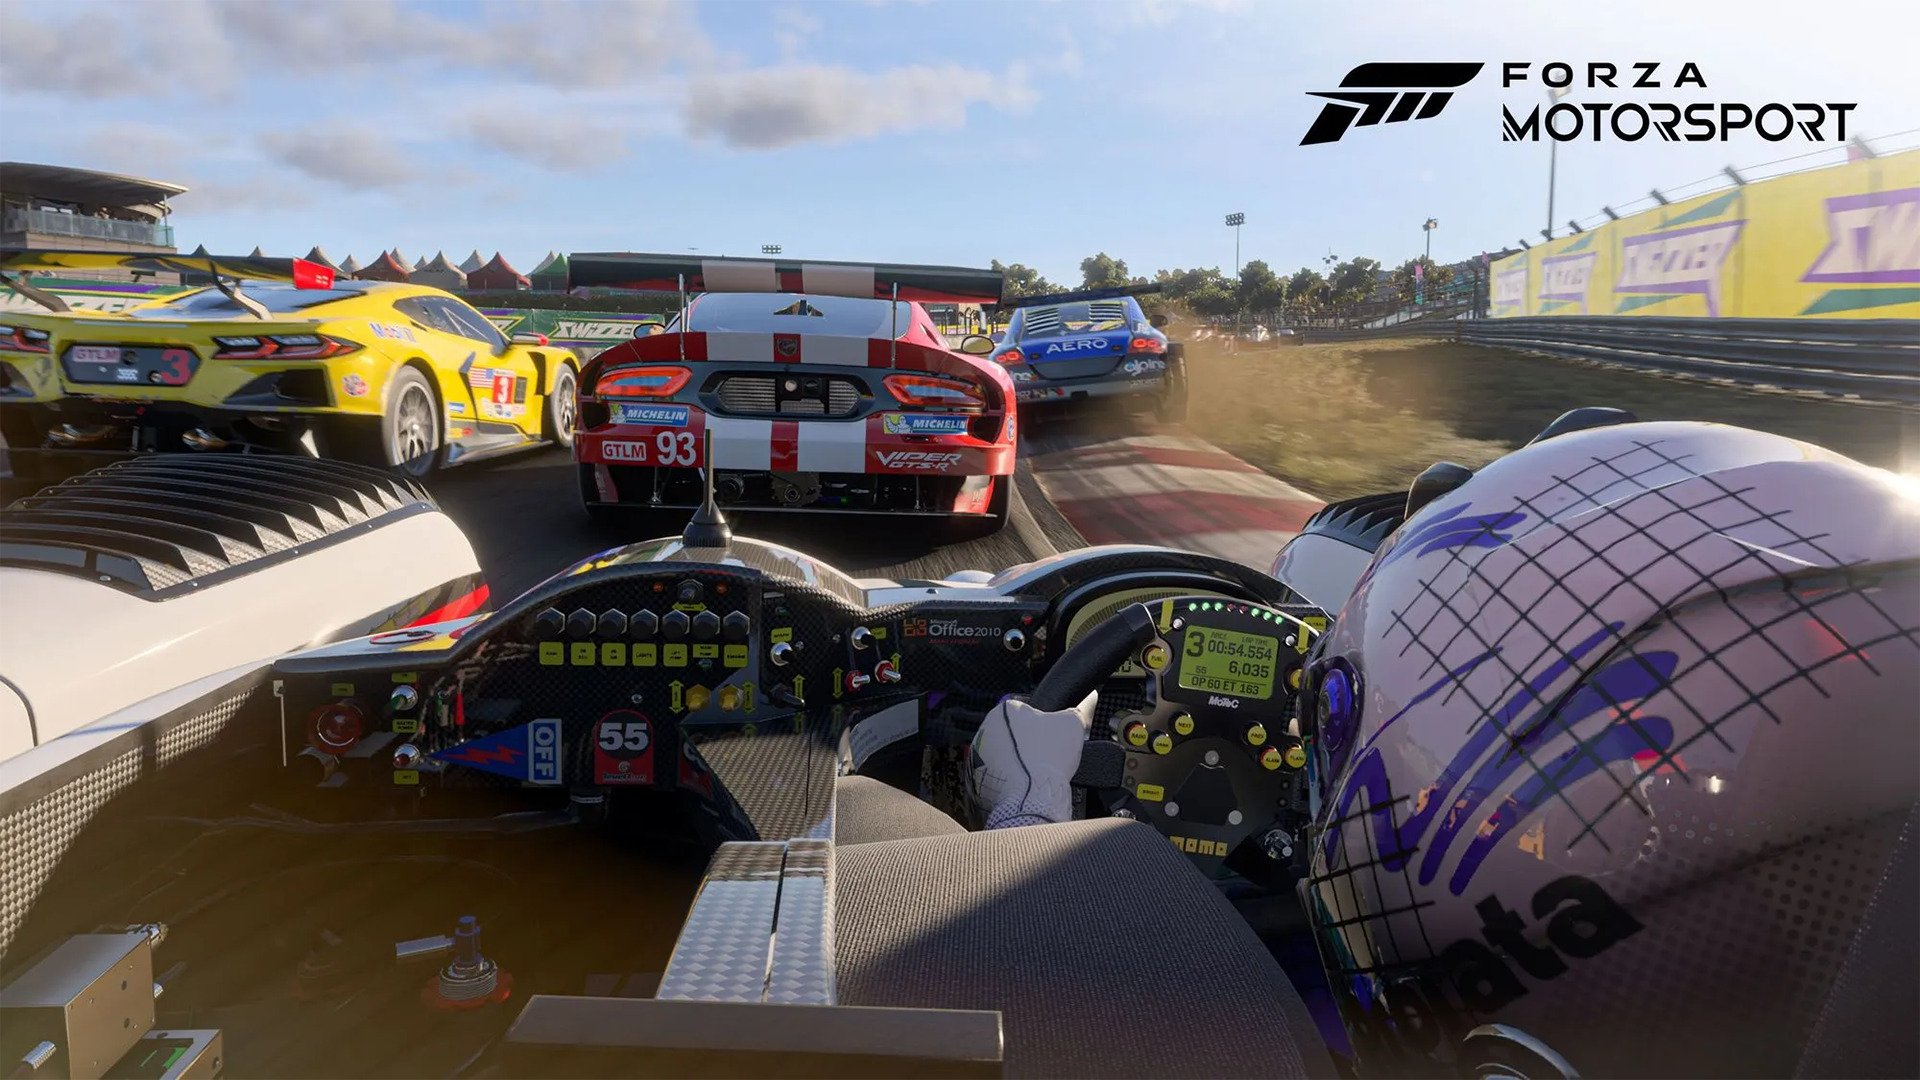 Major Forza Motorsport 7 Update Offers Aston Martin AMR1, Time Attack Mode,  Drift Mode Upgrades and Redrawn Track Limits